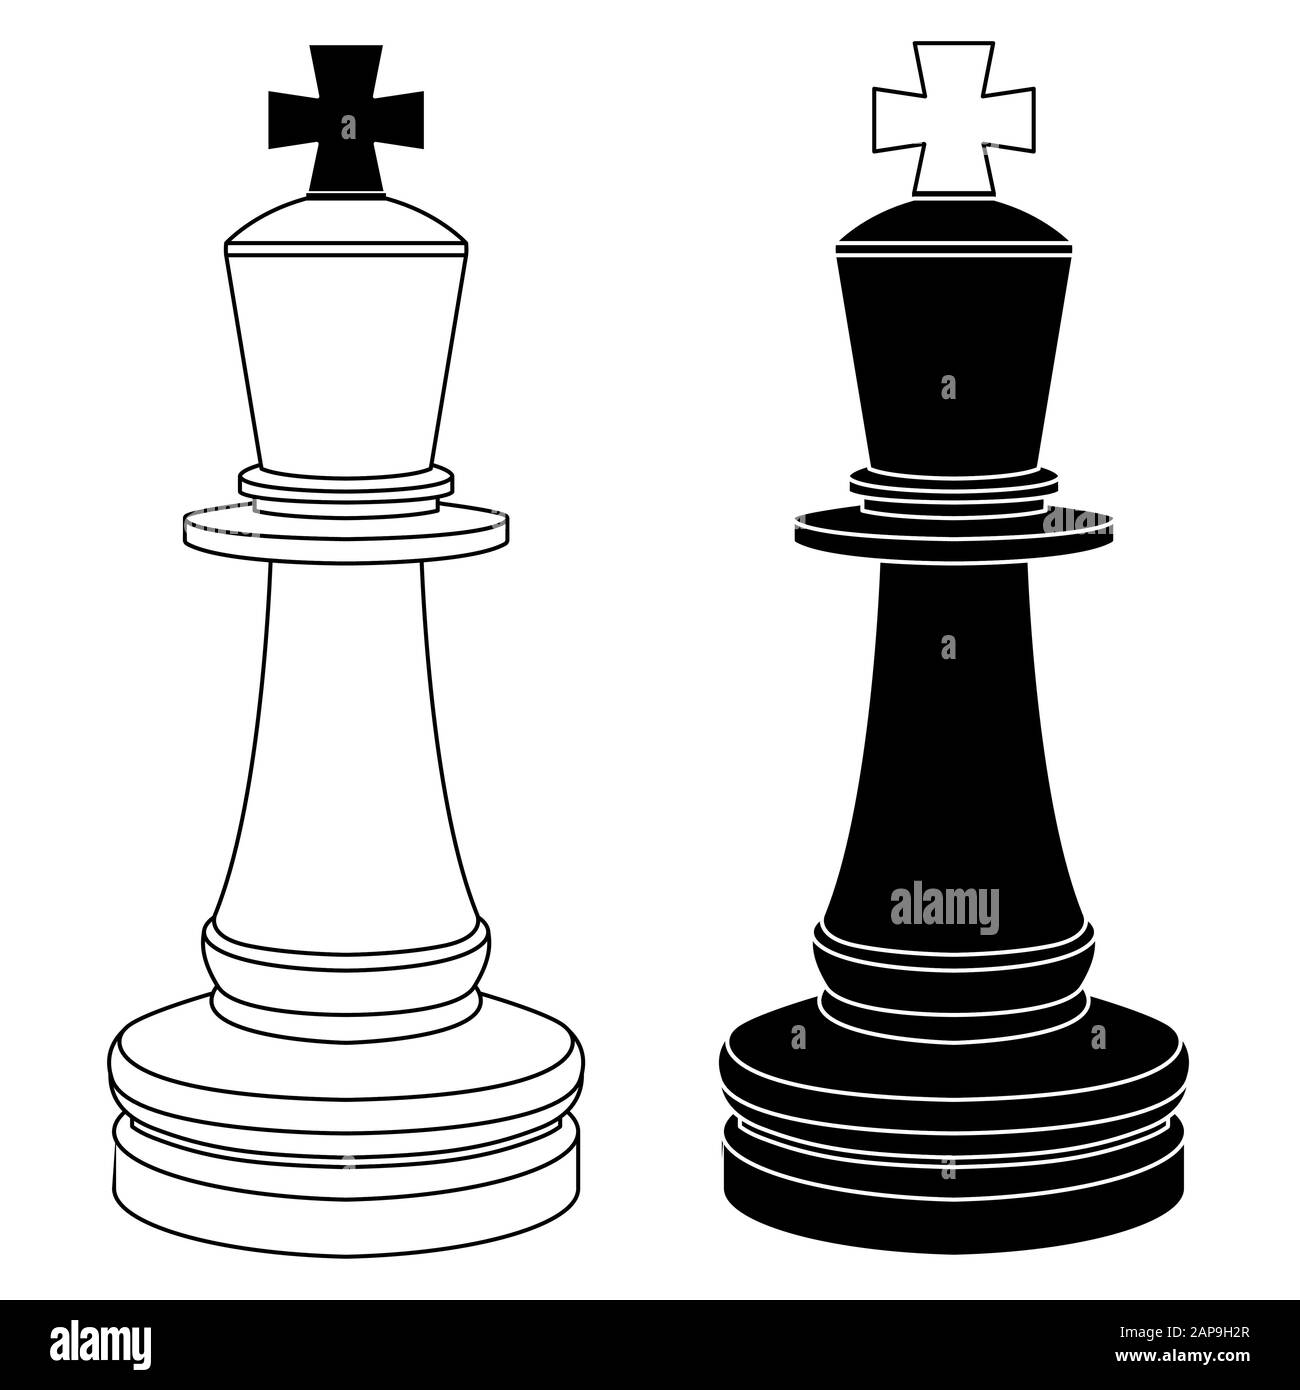 The king chess pieces. 